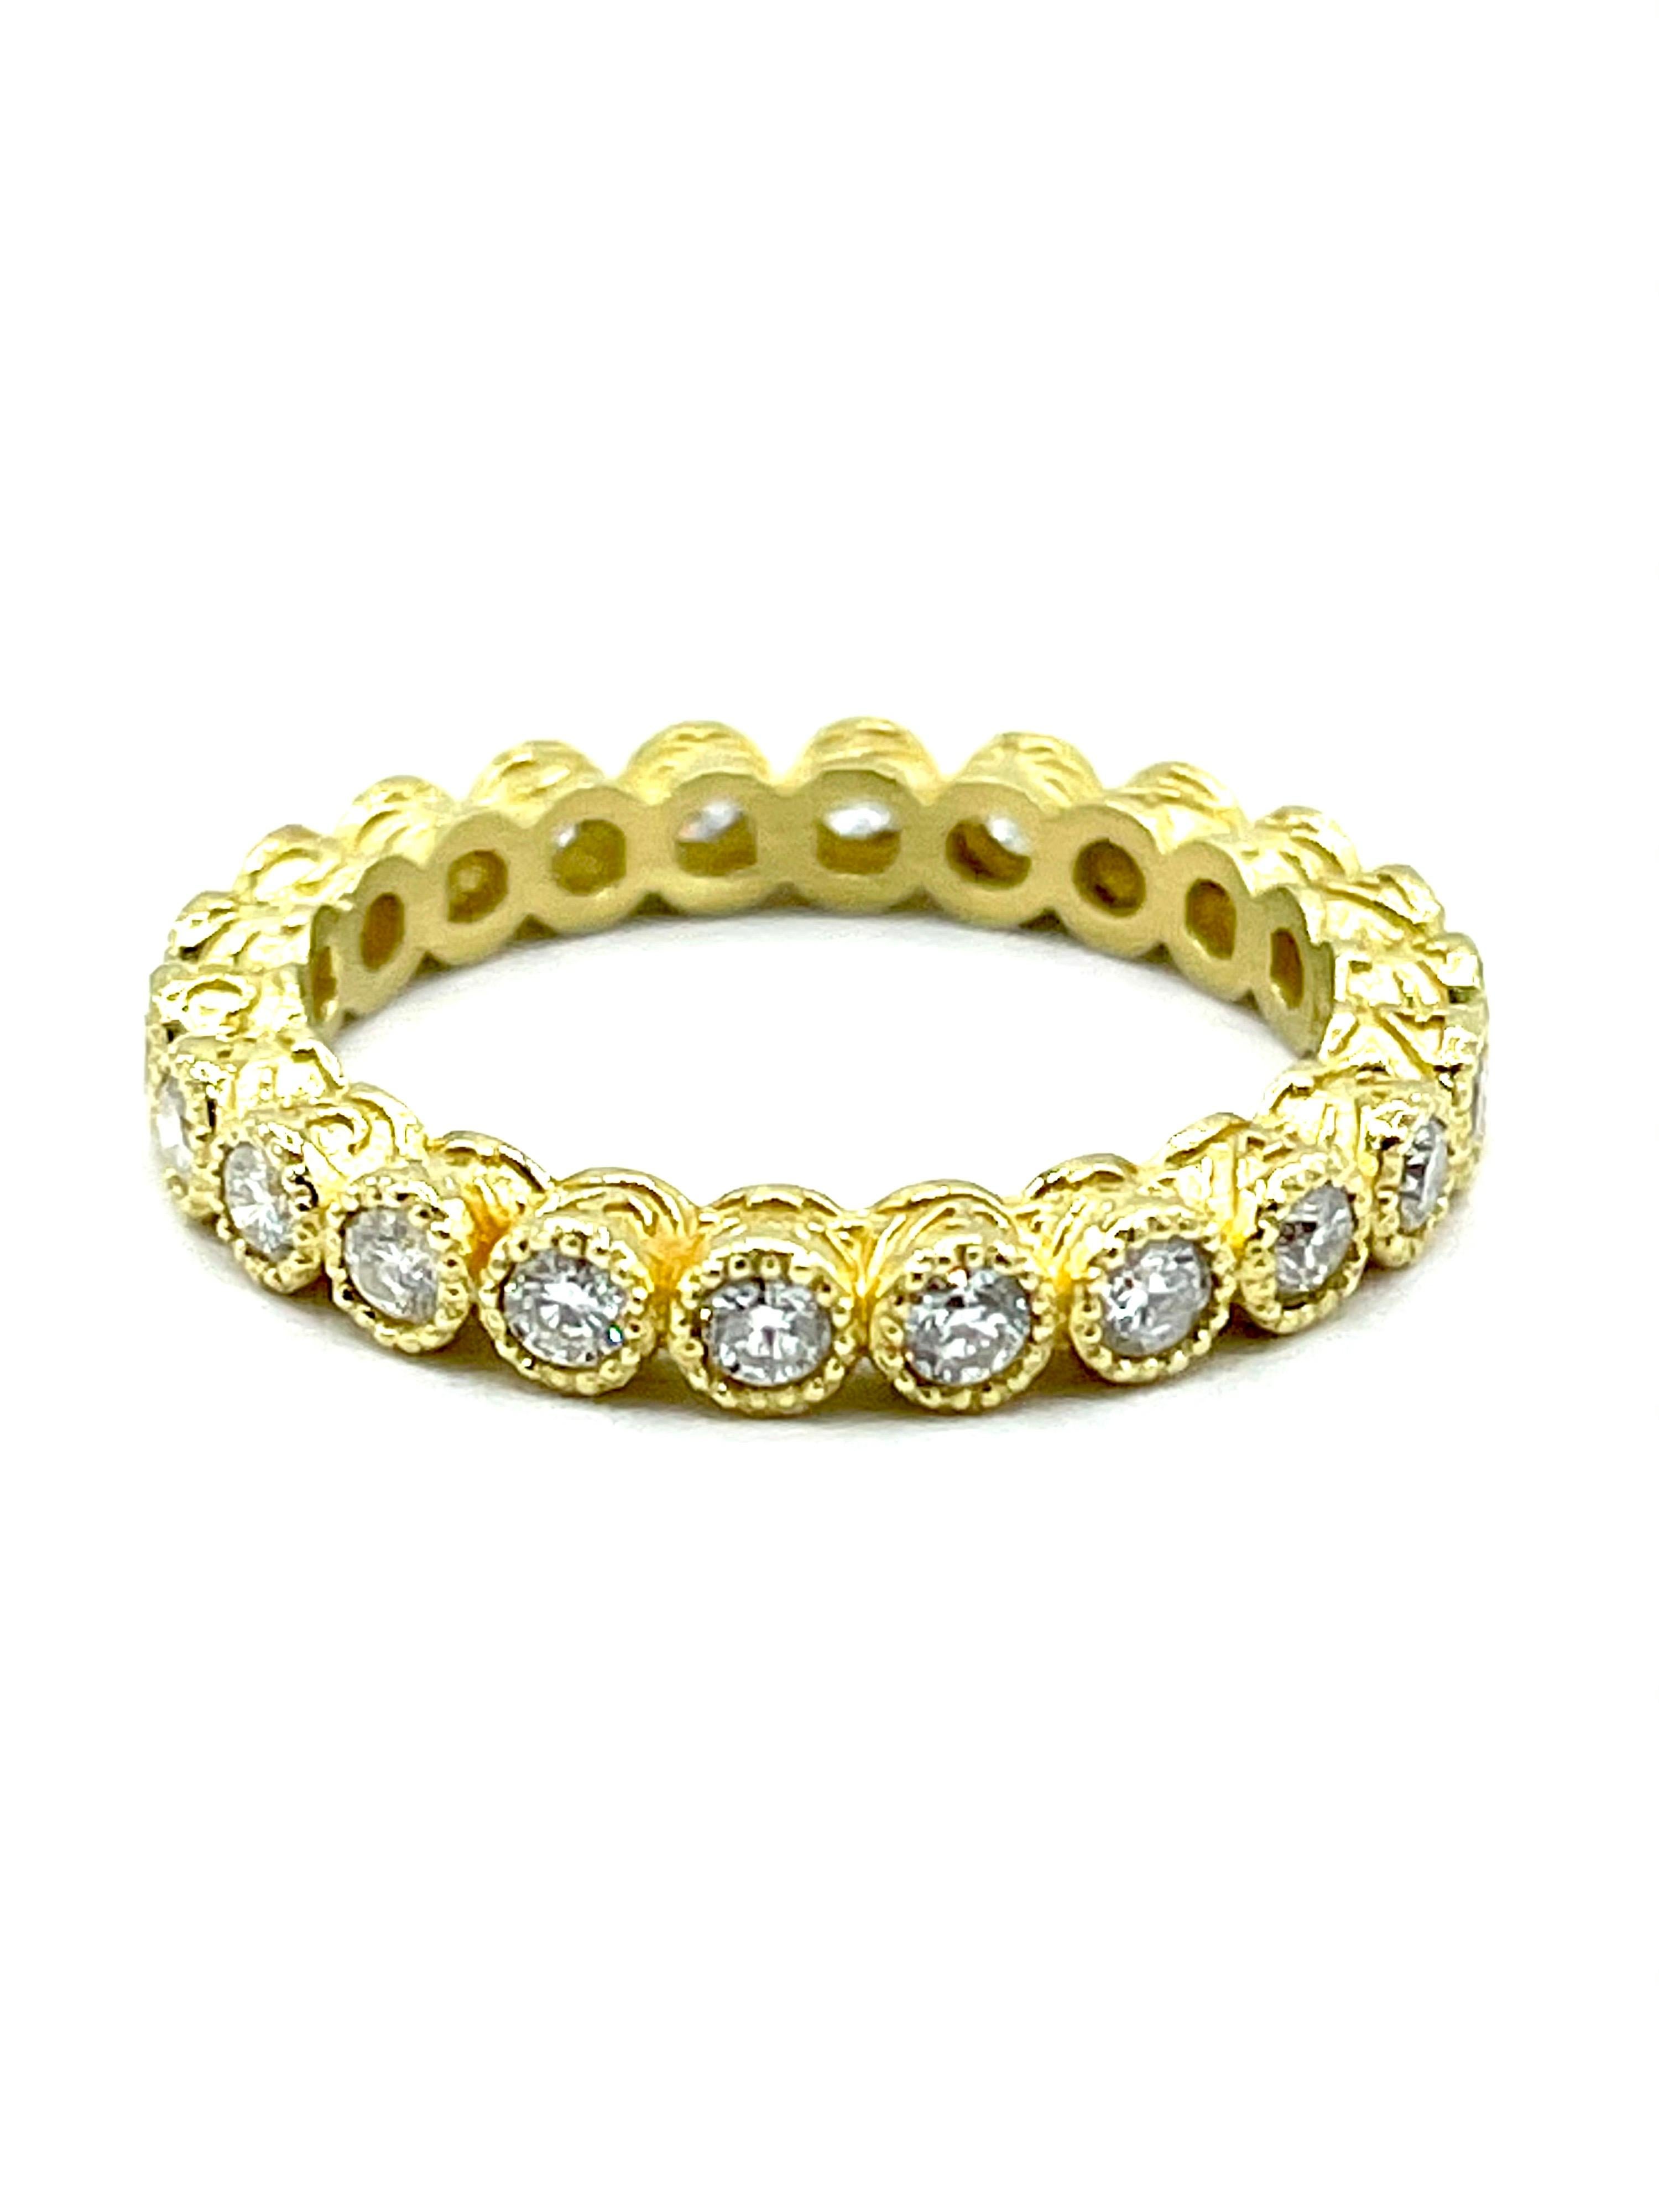 A beautifully handcrafted Tanya Farah Diamond eternity band.  All of the round brilliant cut Diamonds are bezel set with a beaded edge in 18K yellow gold hand engraved setting.  The Diamonds are 0.65 carats total and are graded as G-H color, VS